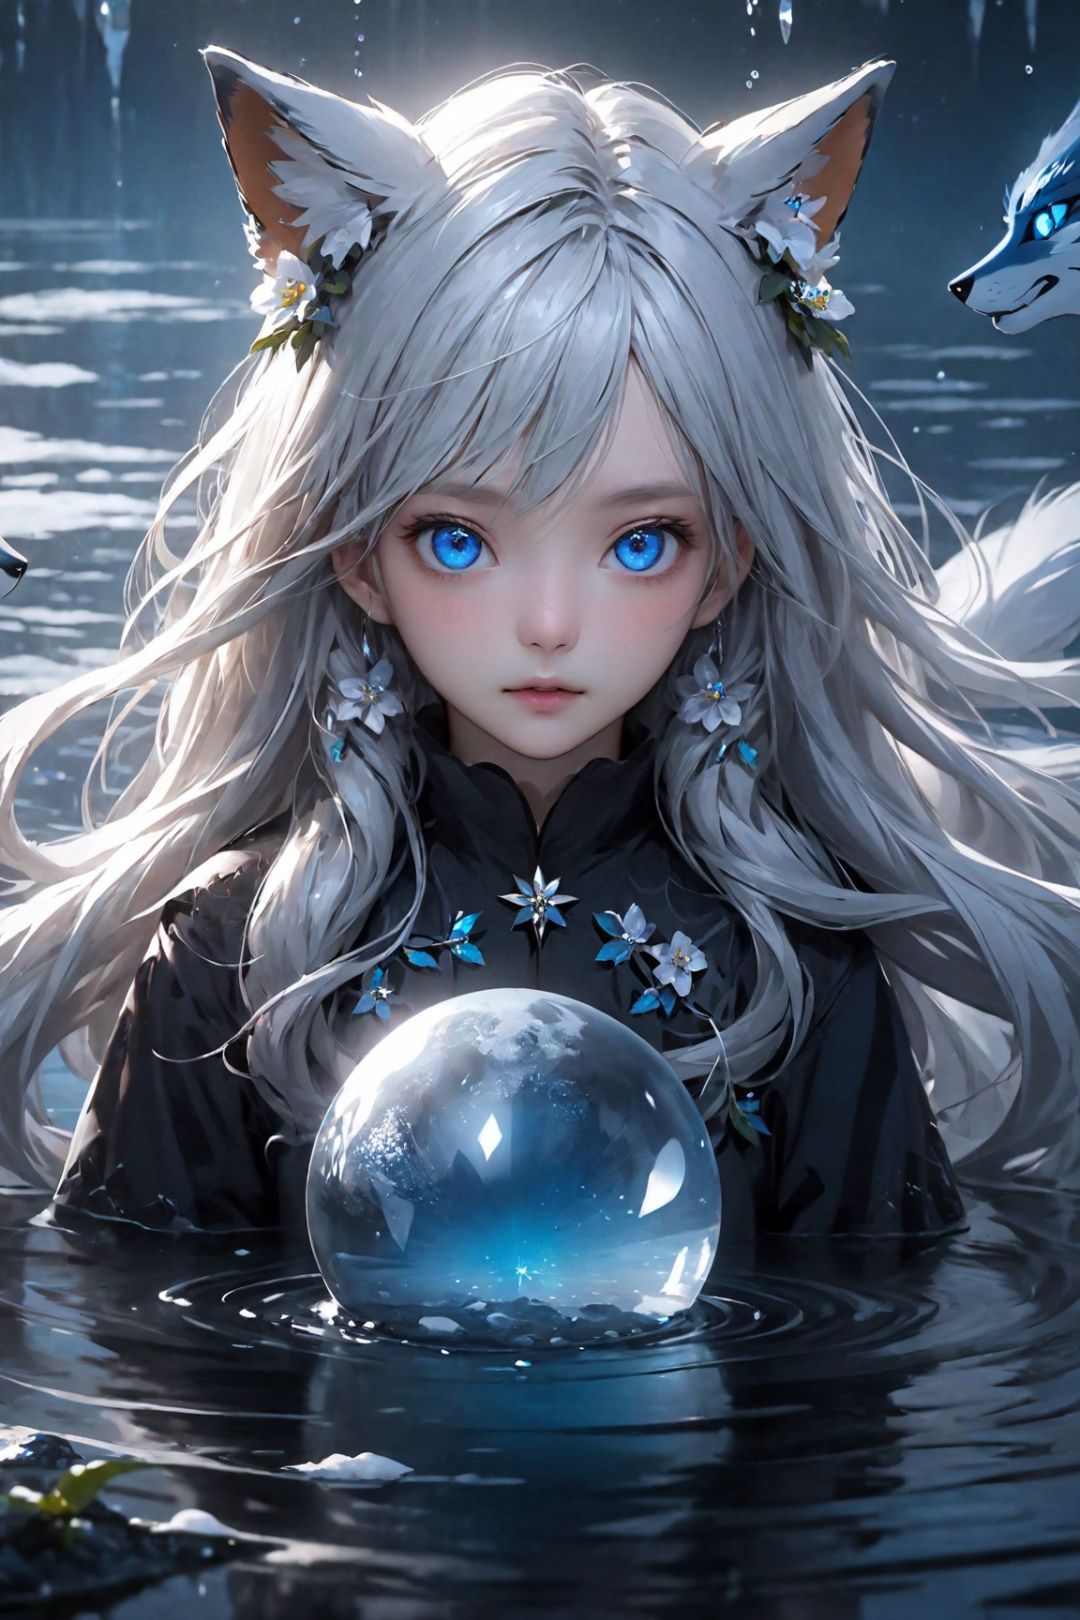  masterpiece, best quality,official art, extremelydetailed cg 8k wallpaper,(flying petals)(detailed ice) , crystalstexture skin, coldexpression, ((fox ears)),white hair, longhair, messy hair, blue eye,looking at viewer,extremely delicate andbeautiful, water, ((beautydetailed eye)), highlydetailed, cinematiclighting, ((beautiful face),fine water surface, (originalfigure painting), ultra-detailed, incrediblydetailed, (an extremelydelicate and beautiful),beautiful detailed eyes,(best quality), 